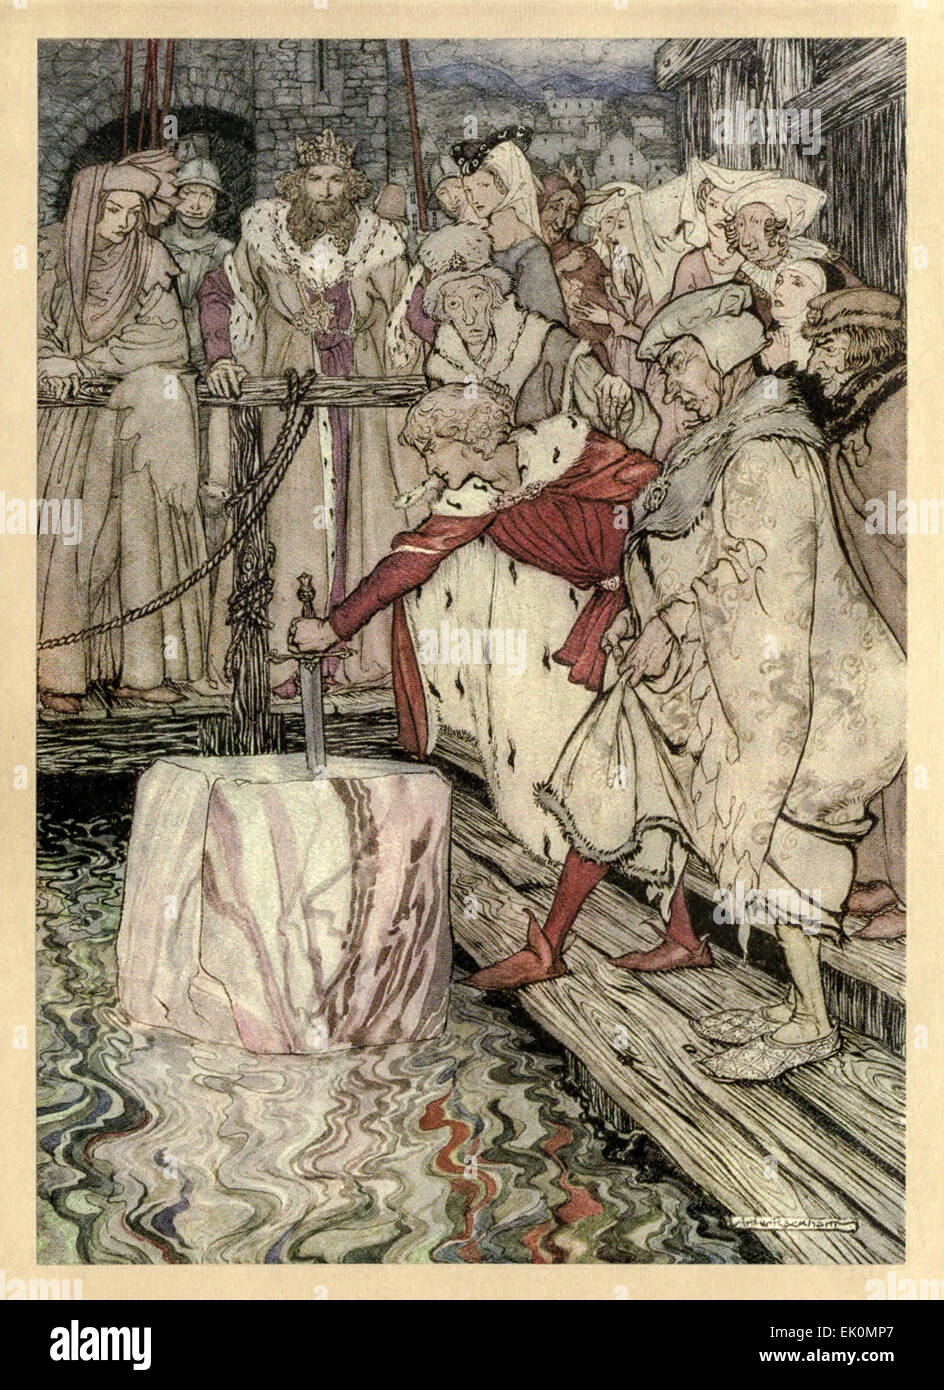 'How Galahad drew out the sword from the floating stone at Camelot.' from 'The Romance of King Arthur and his Knights of the Round Table', illustration by Arthur Rackham (1867-1939). See description for more information. Stock Photo